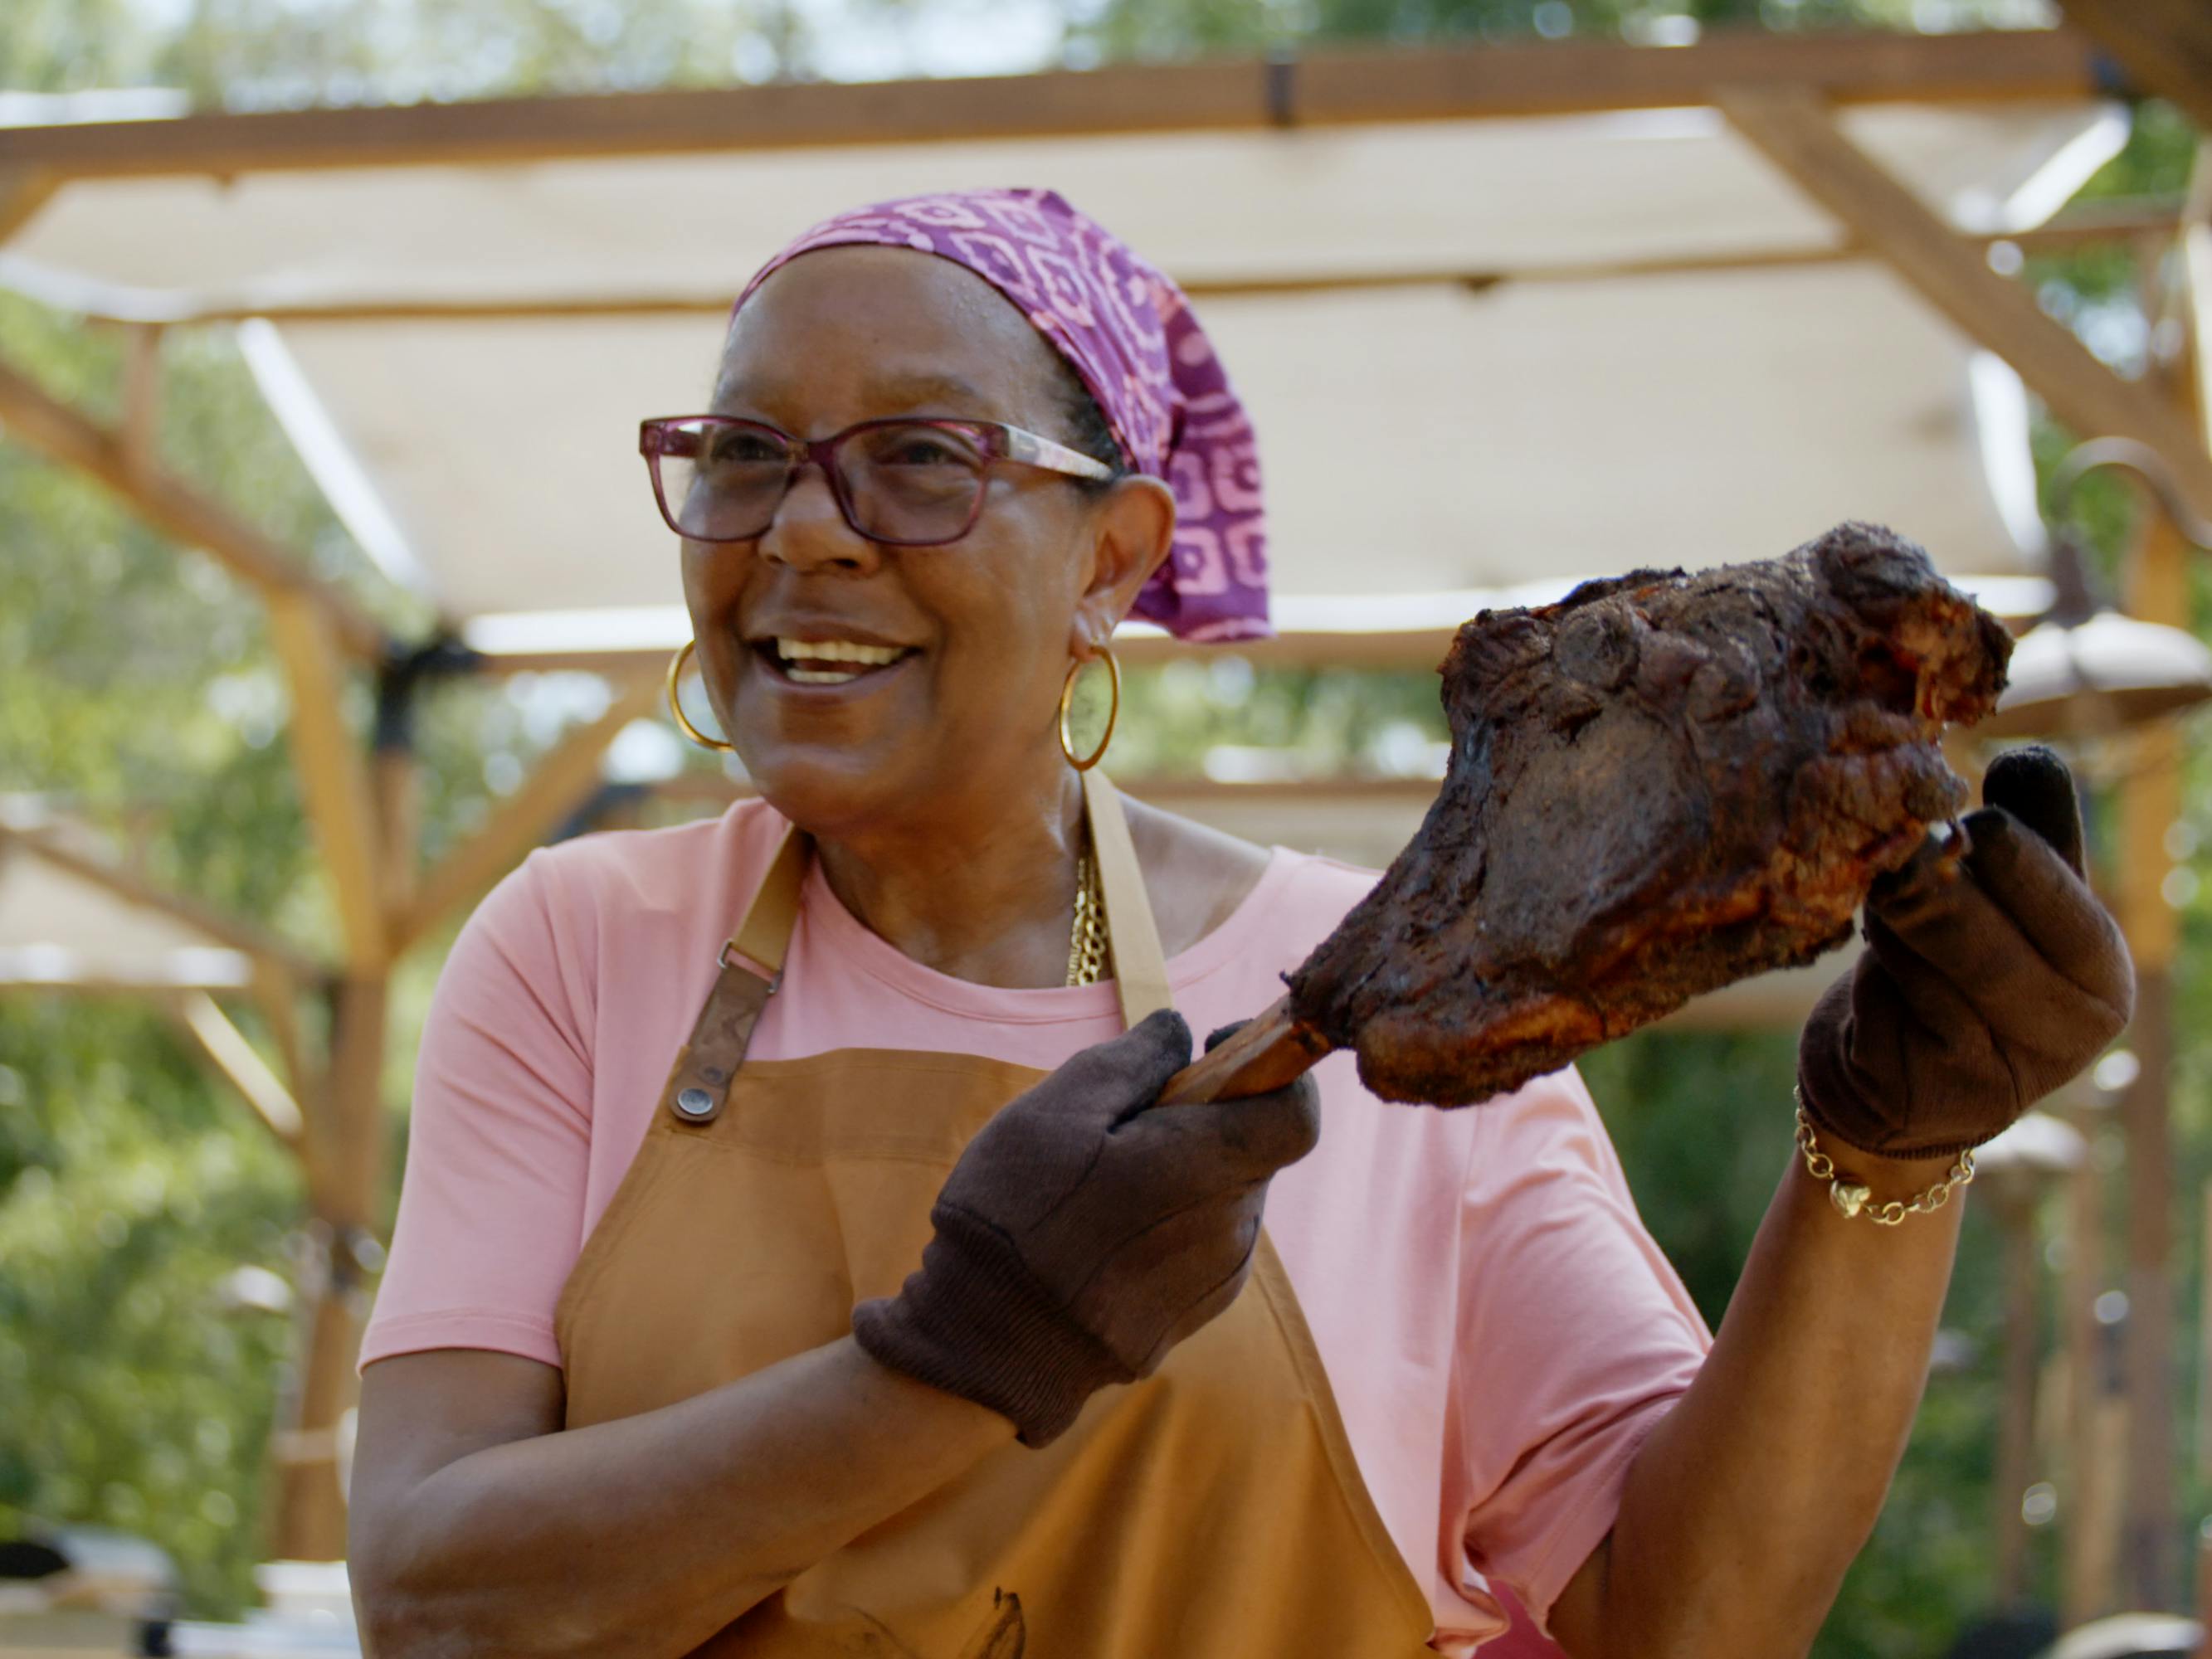 Sylvie Currie brandishes a leg of meat, wearing a purple hanker-chief and brown apron.